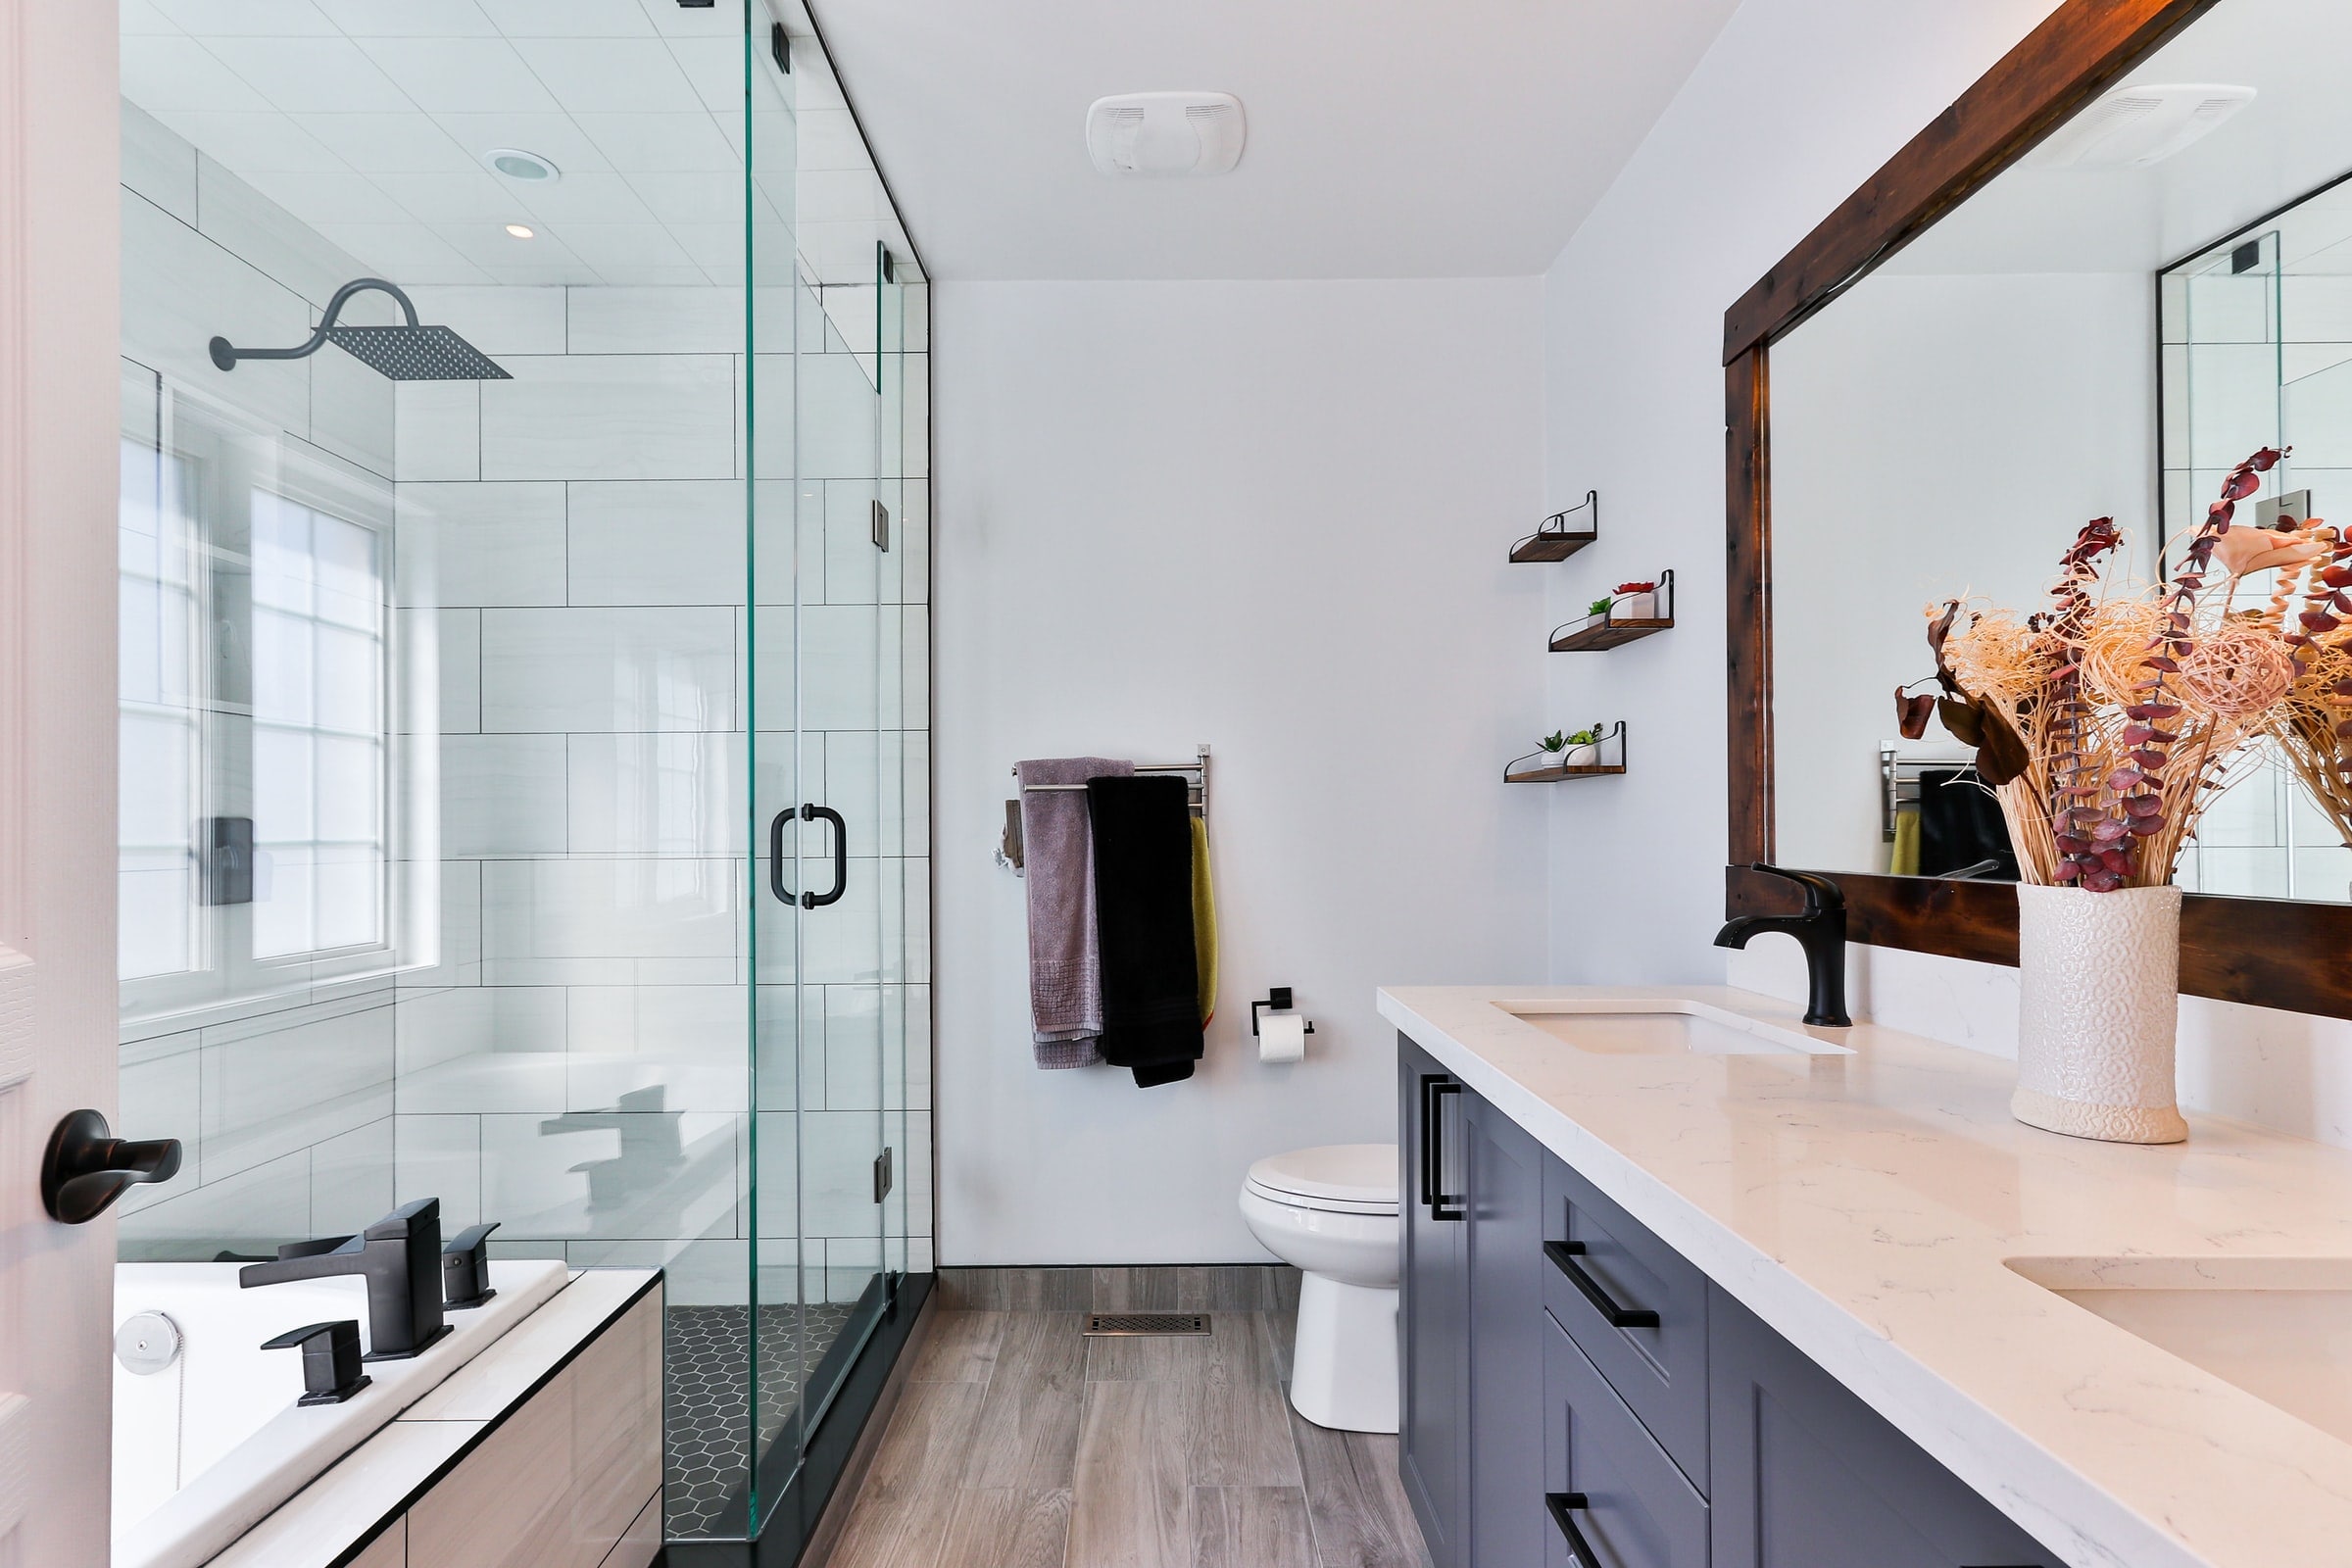 Average Nyc Renovation Cost, How Much Does It Cost To Remodel A Bathroom In Nyc